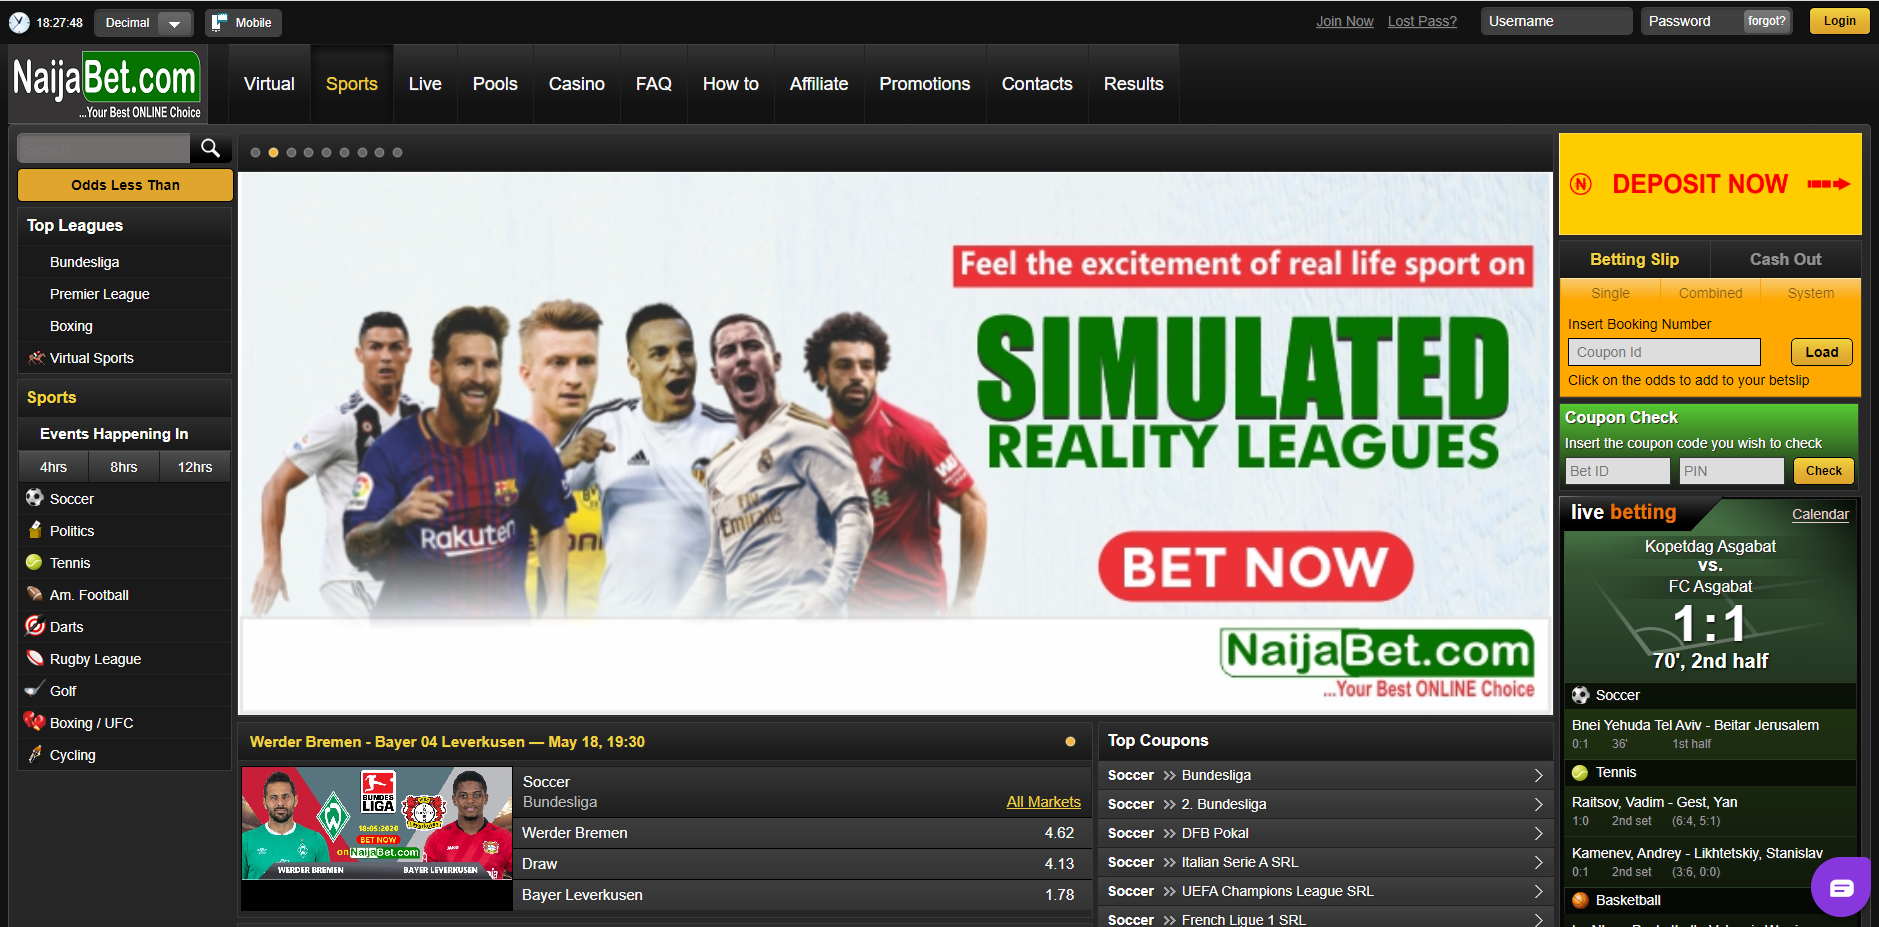 NaijaBet official site